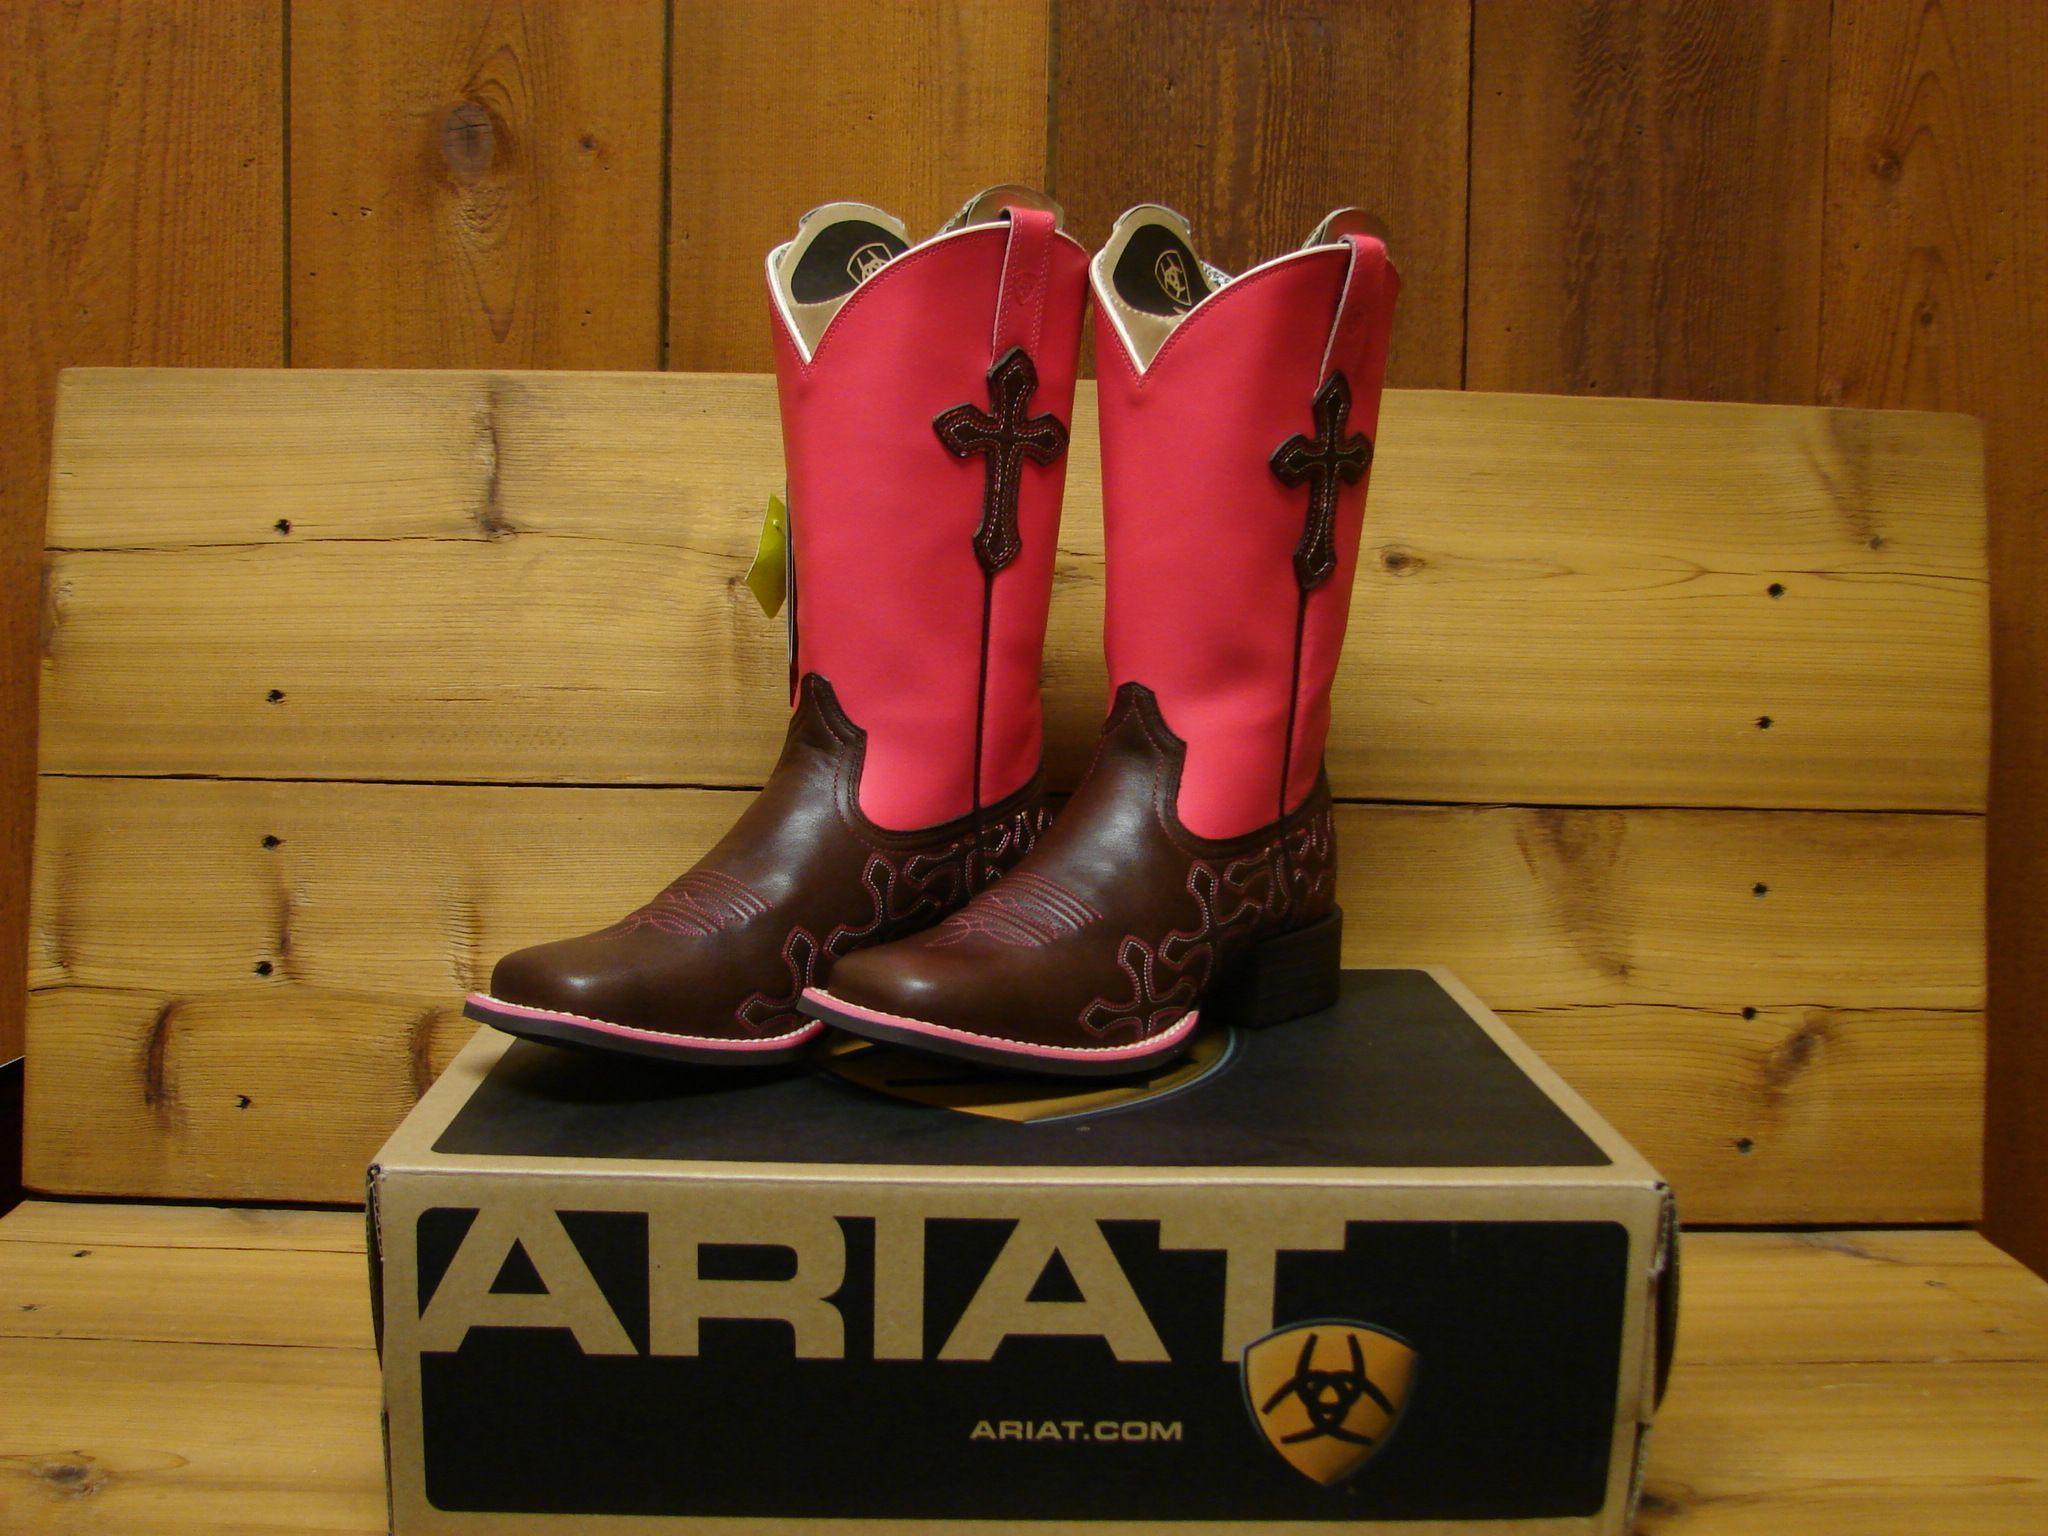 Ariat Boots Where Are They Made And Does The Country Matter